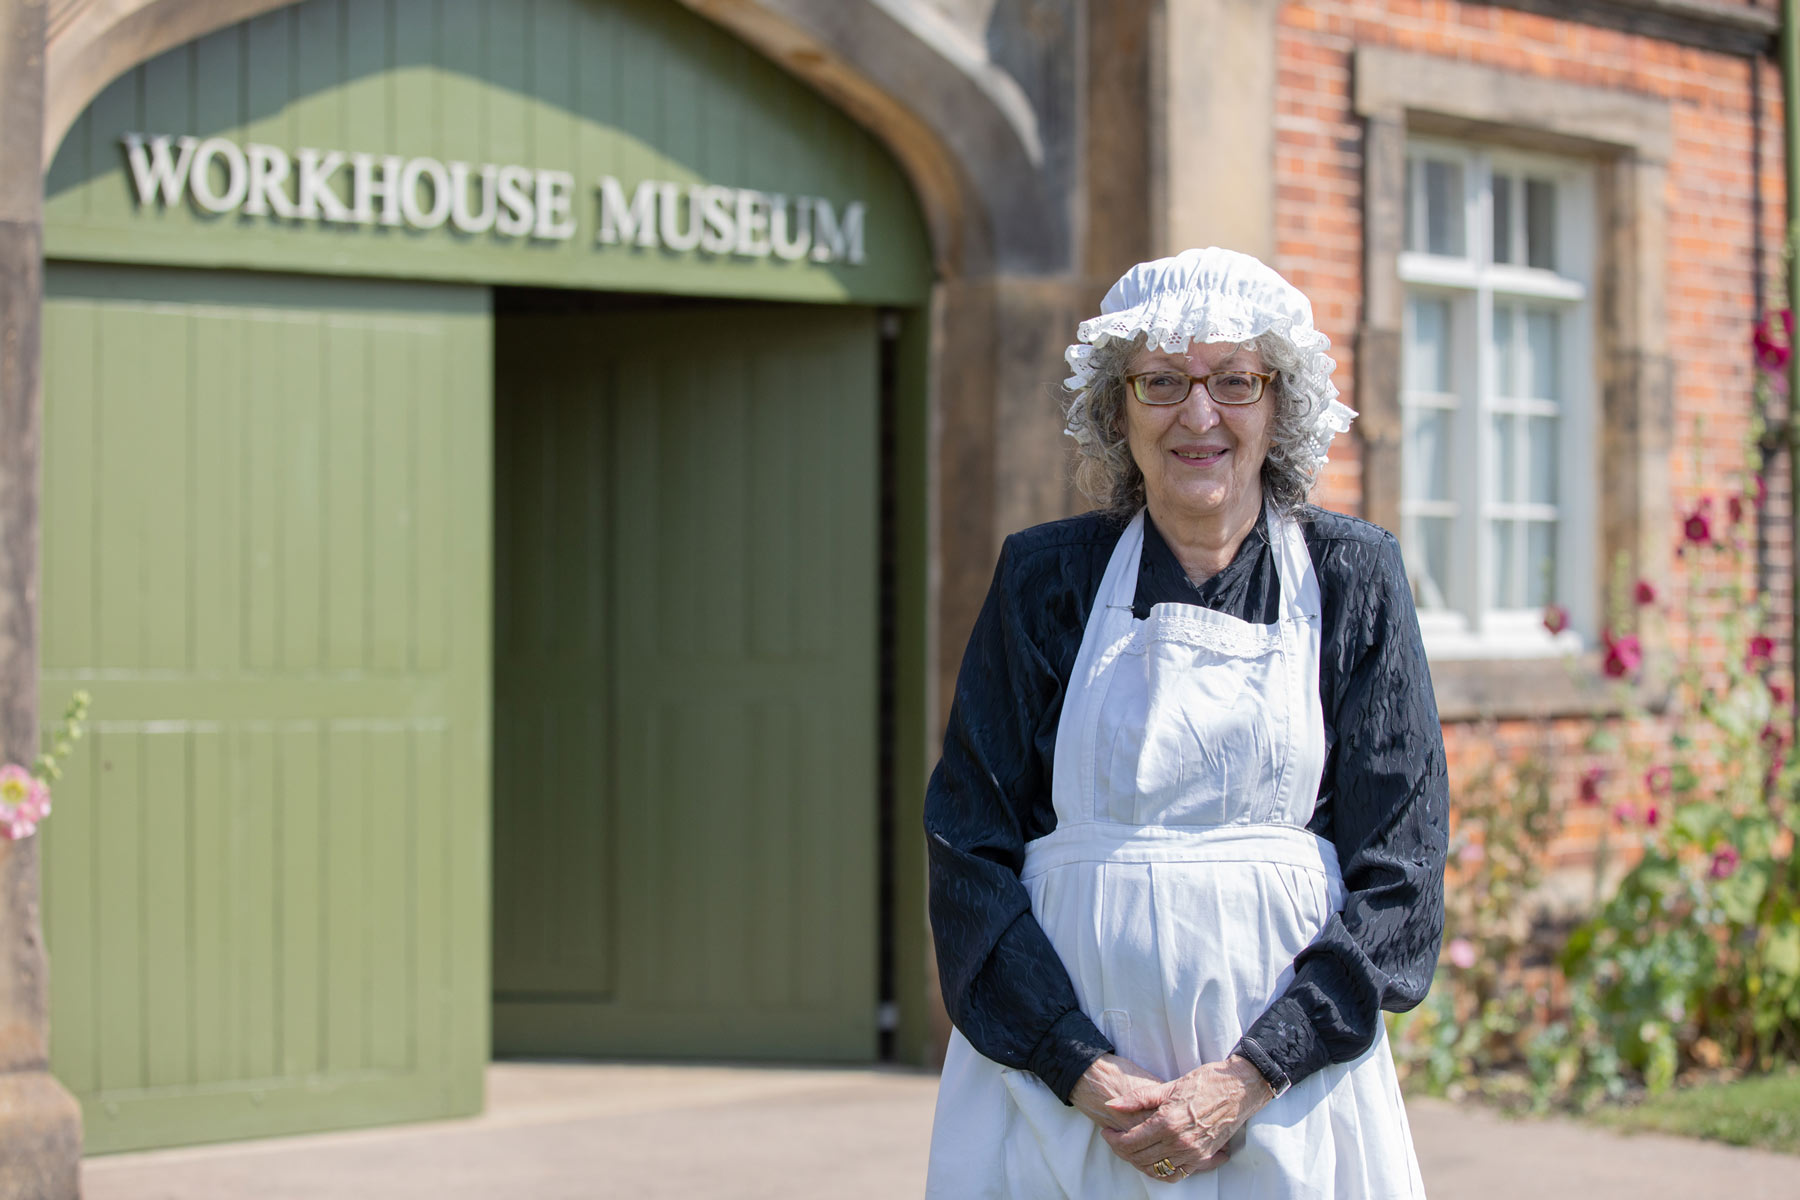 Volunteer Lindy Webb offers a welcome to the Workhouse Museum in Ripon